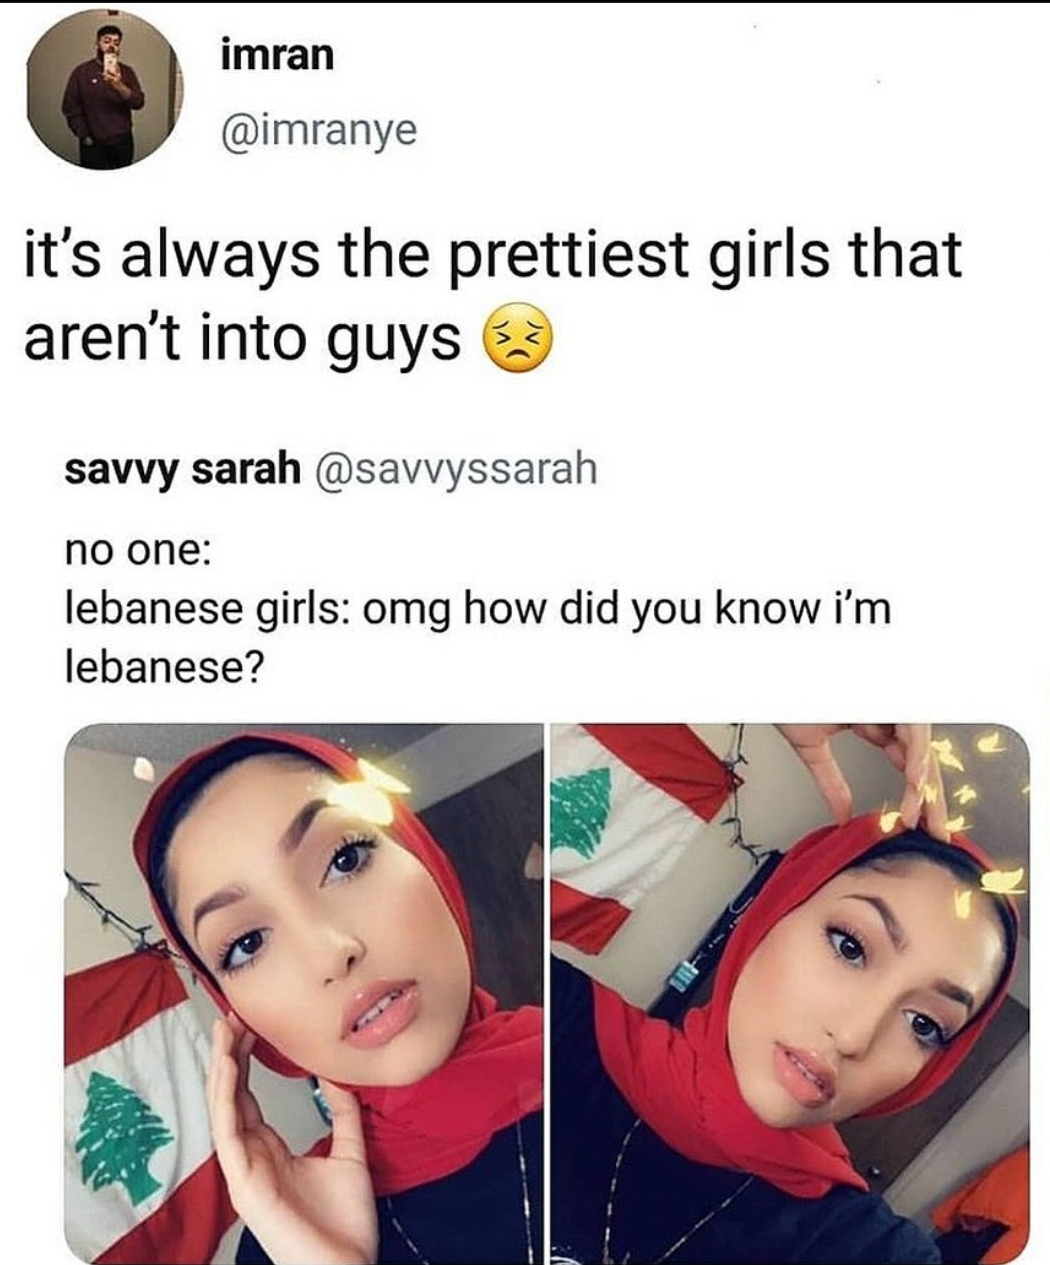 imran it's always the prettiest girls that aren't into guys 3 savvy sarah no one lebanese girls omg how did you know i'm lebanese?